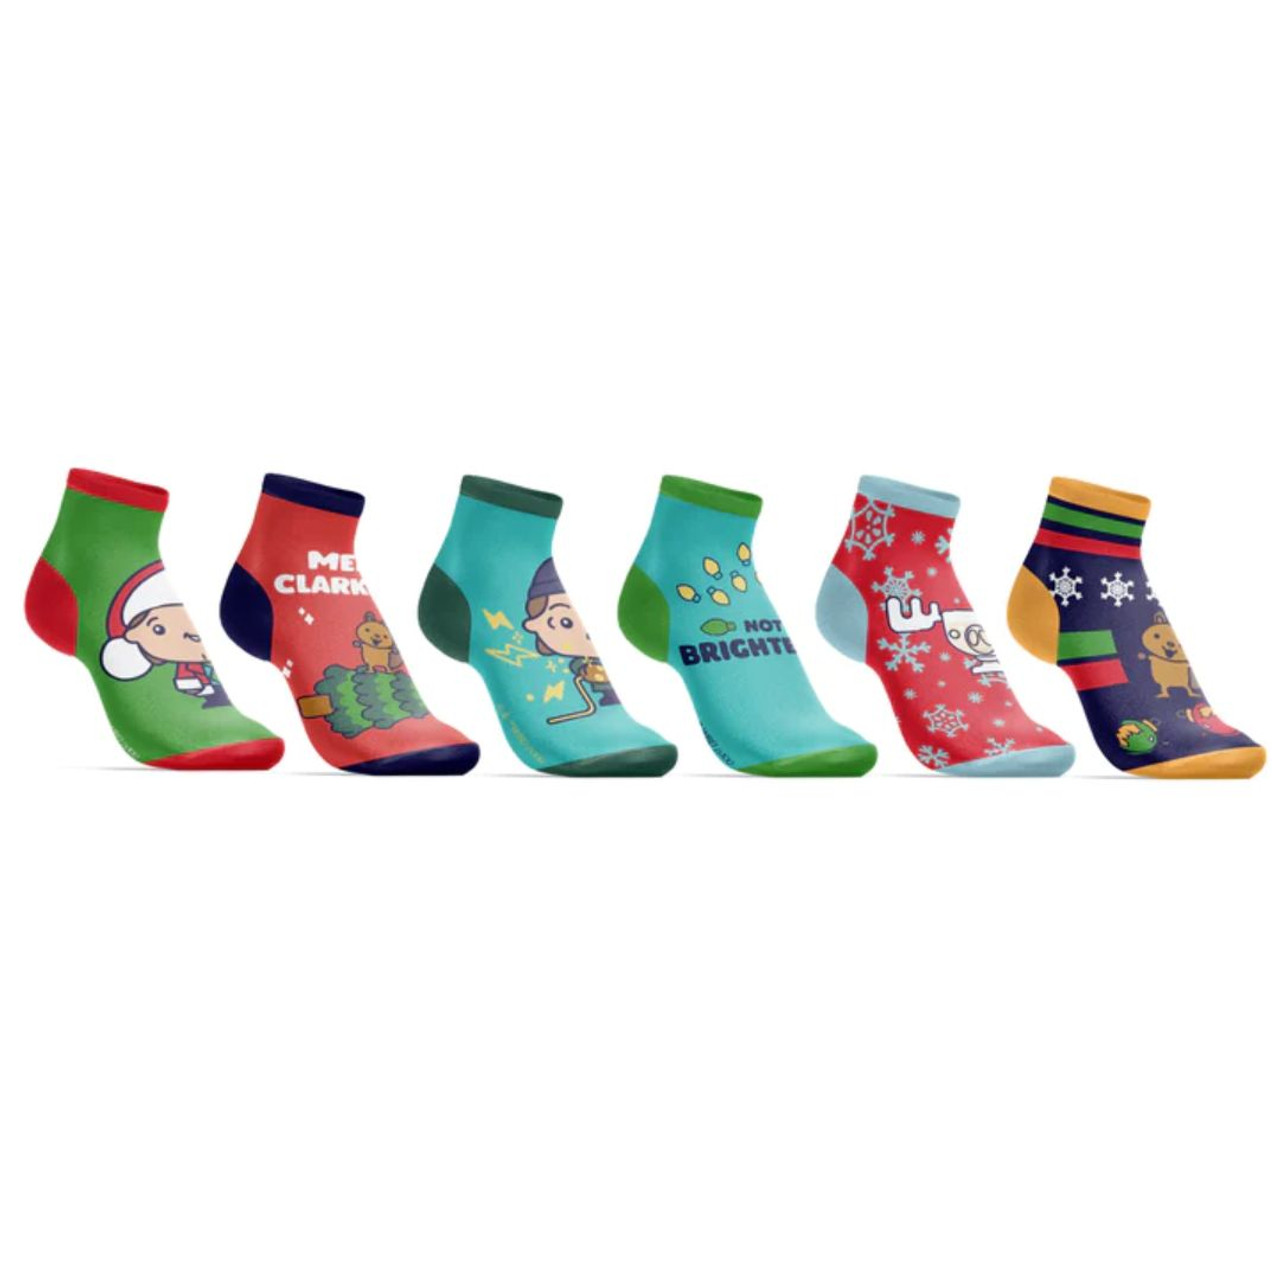 https://cdn11.bigcommerce.com/s-c9a80/images/stencil/1280x1280/products/16909/63063/Christmas_Vacation_6_pack_ankle_socks__43946.1694720251.jpg?c=2